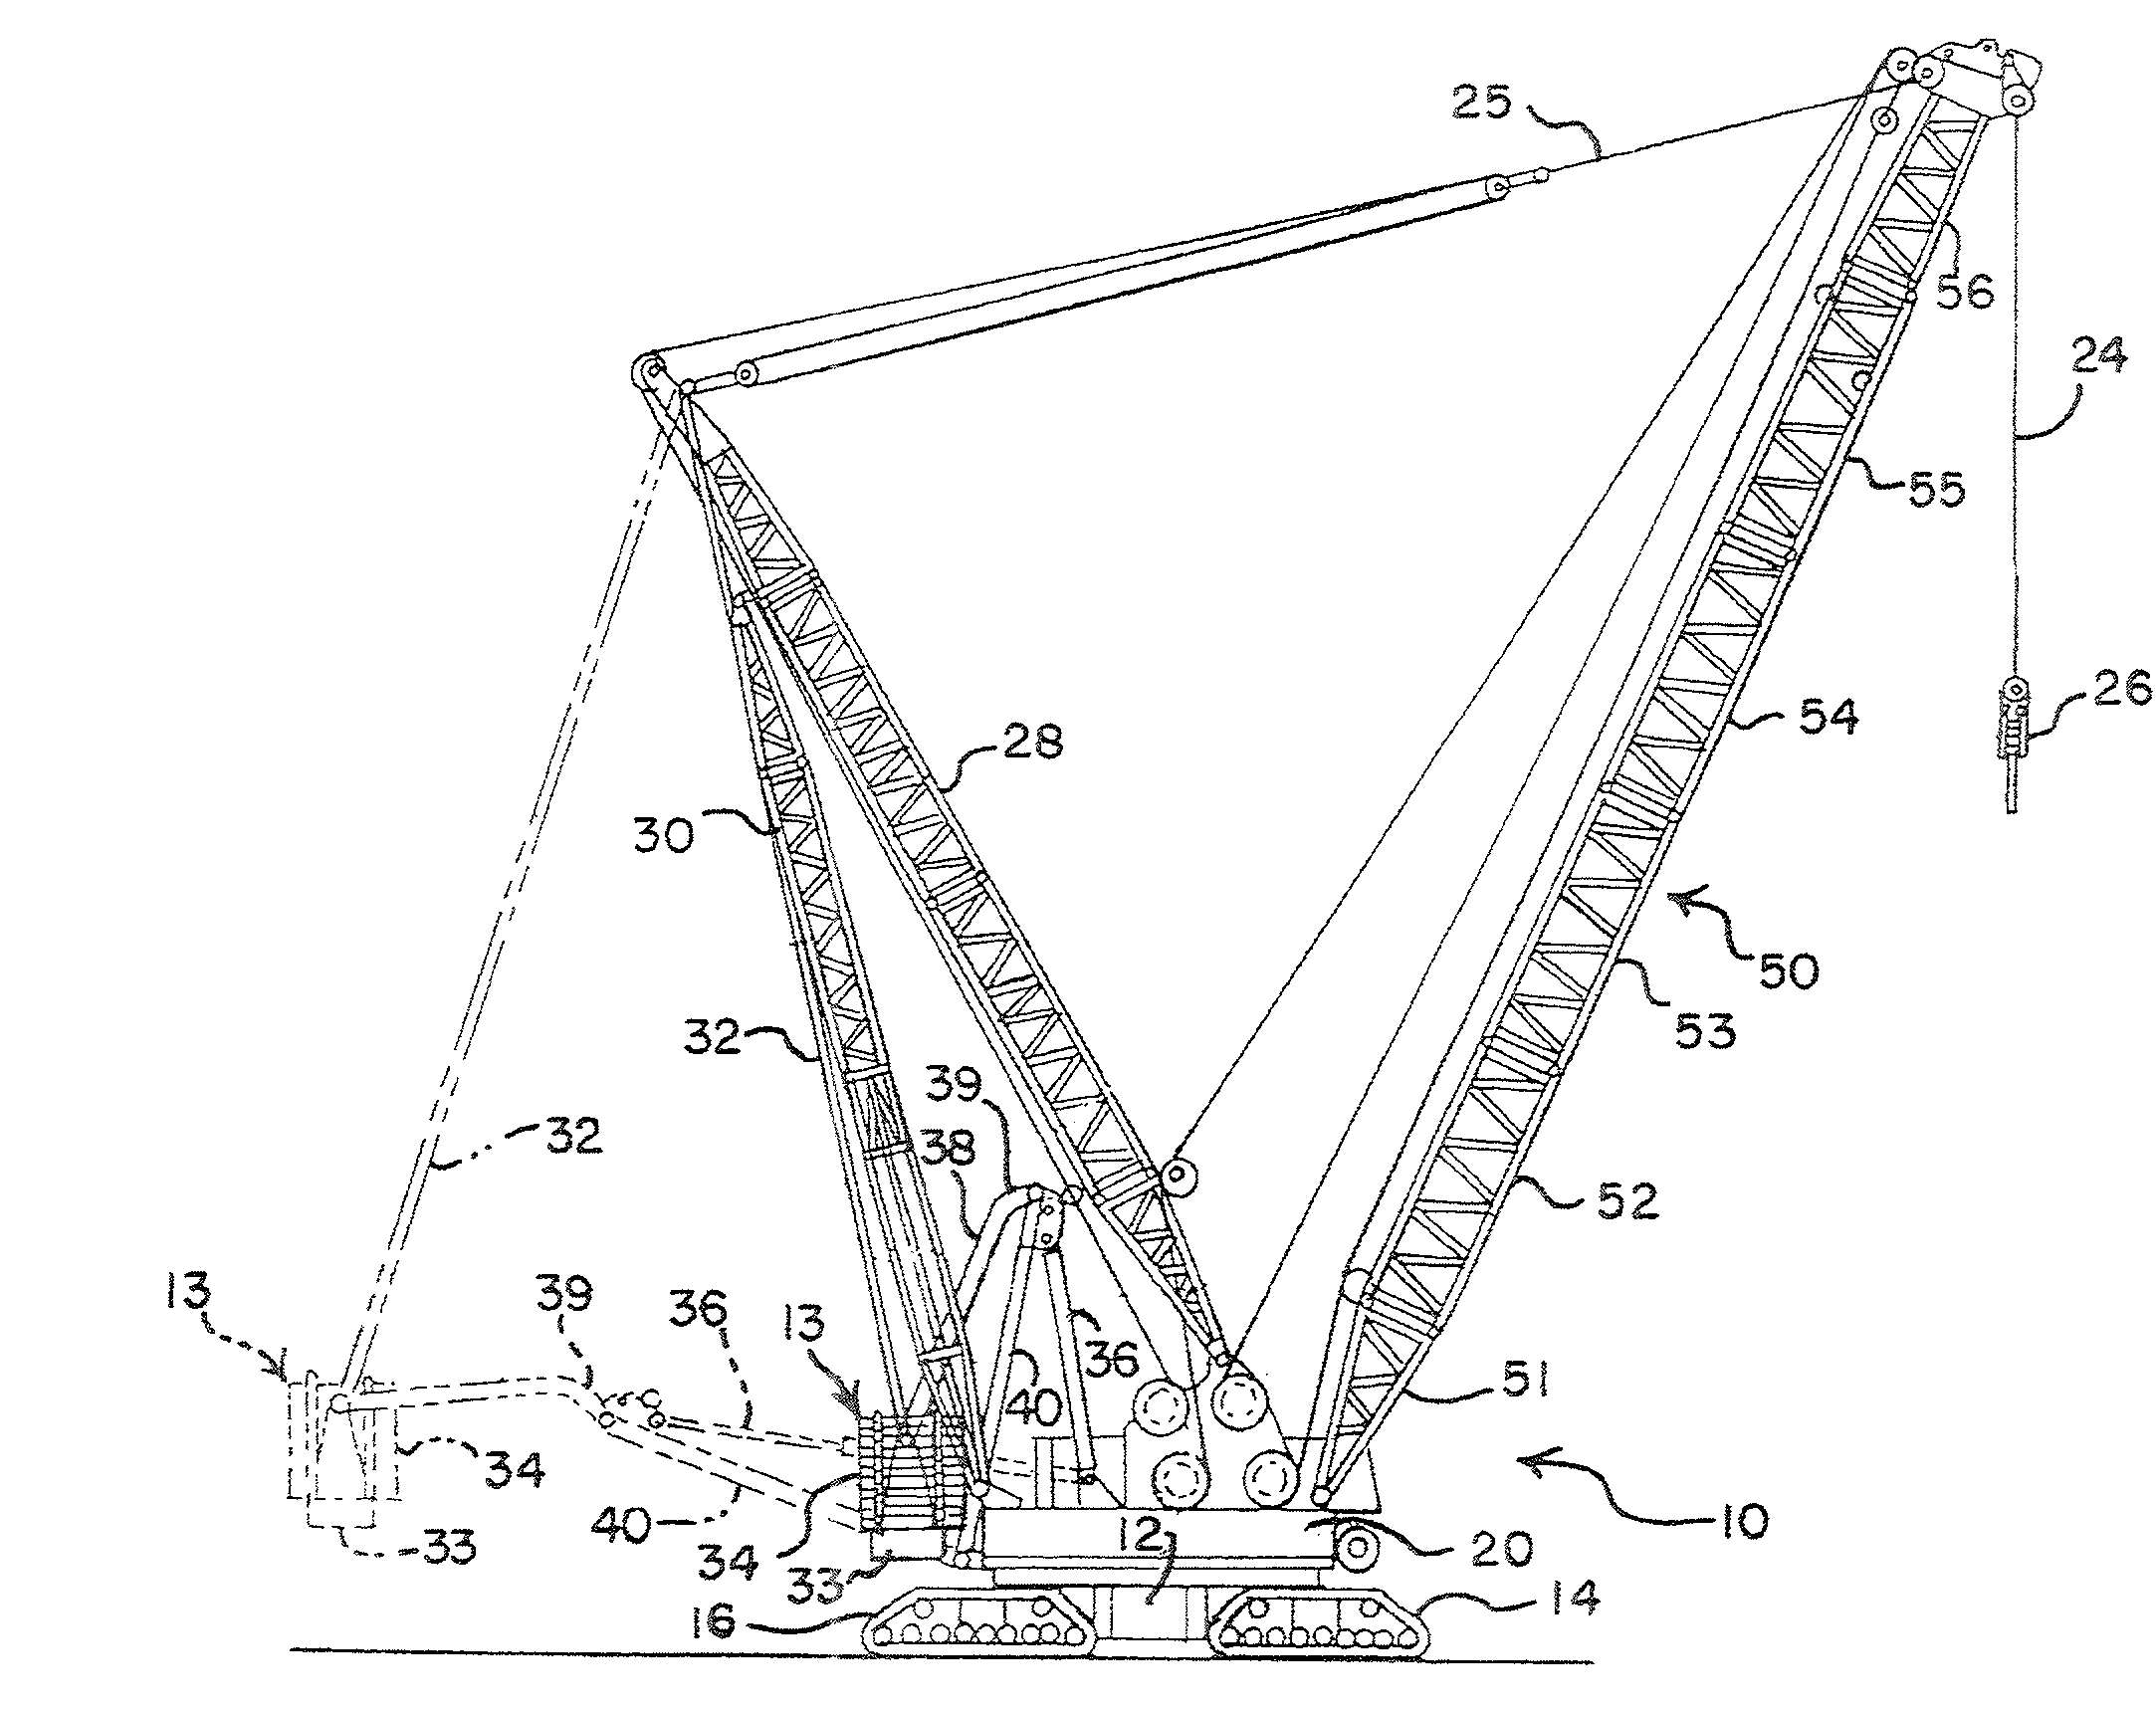 Pinned connection system for crane column segments